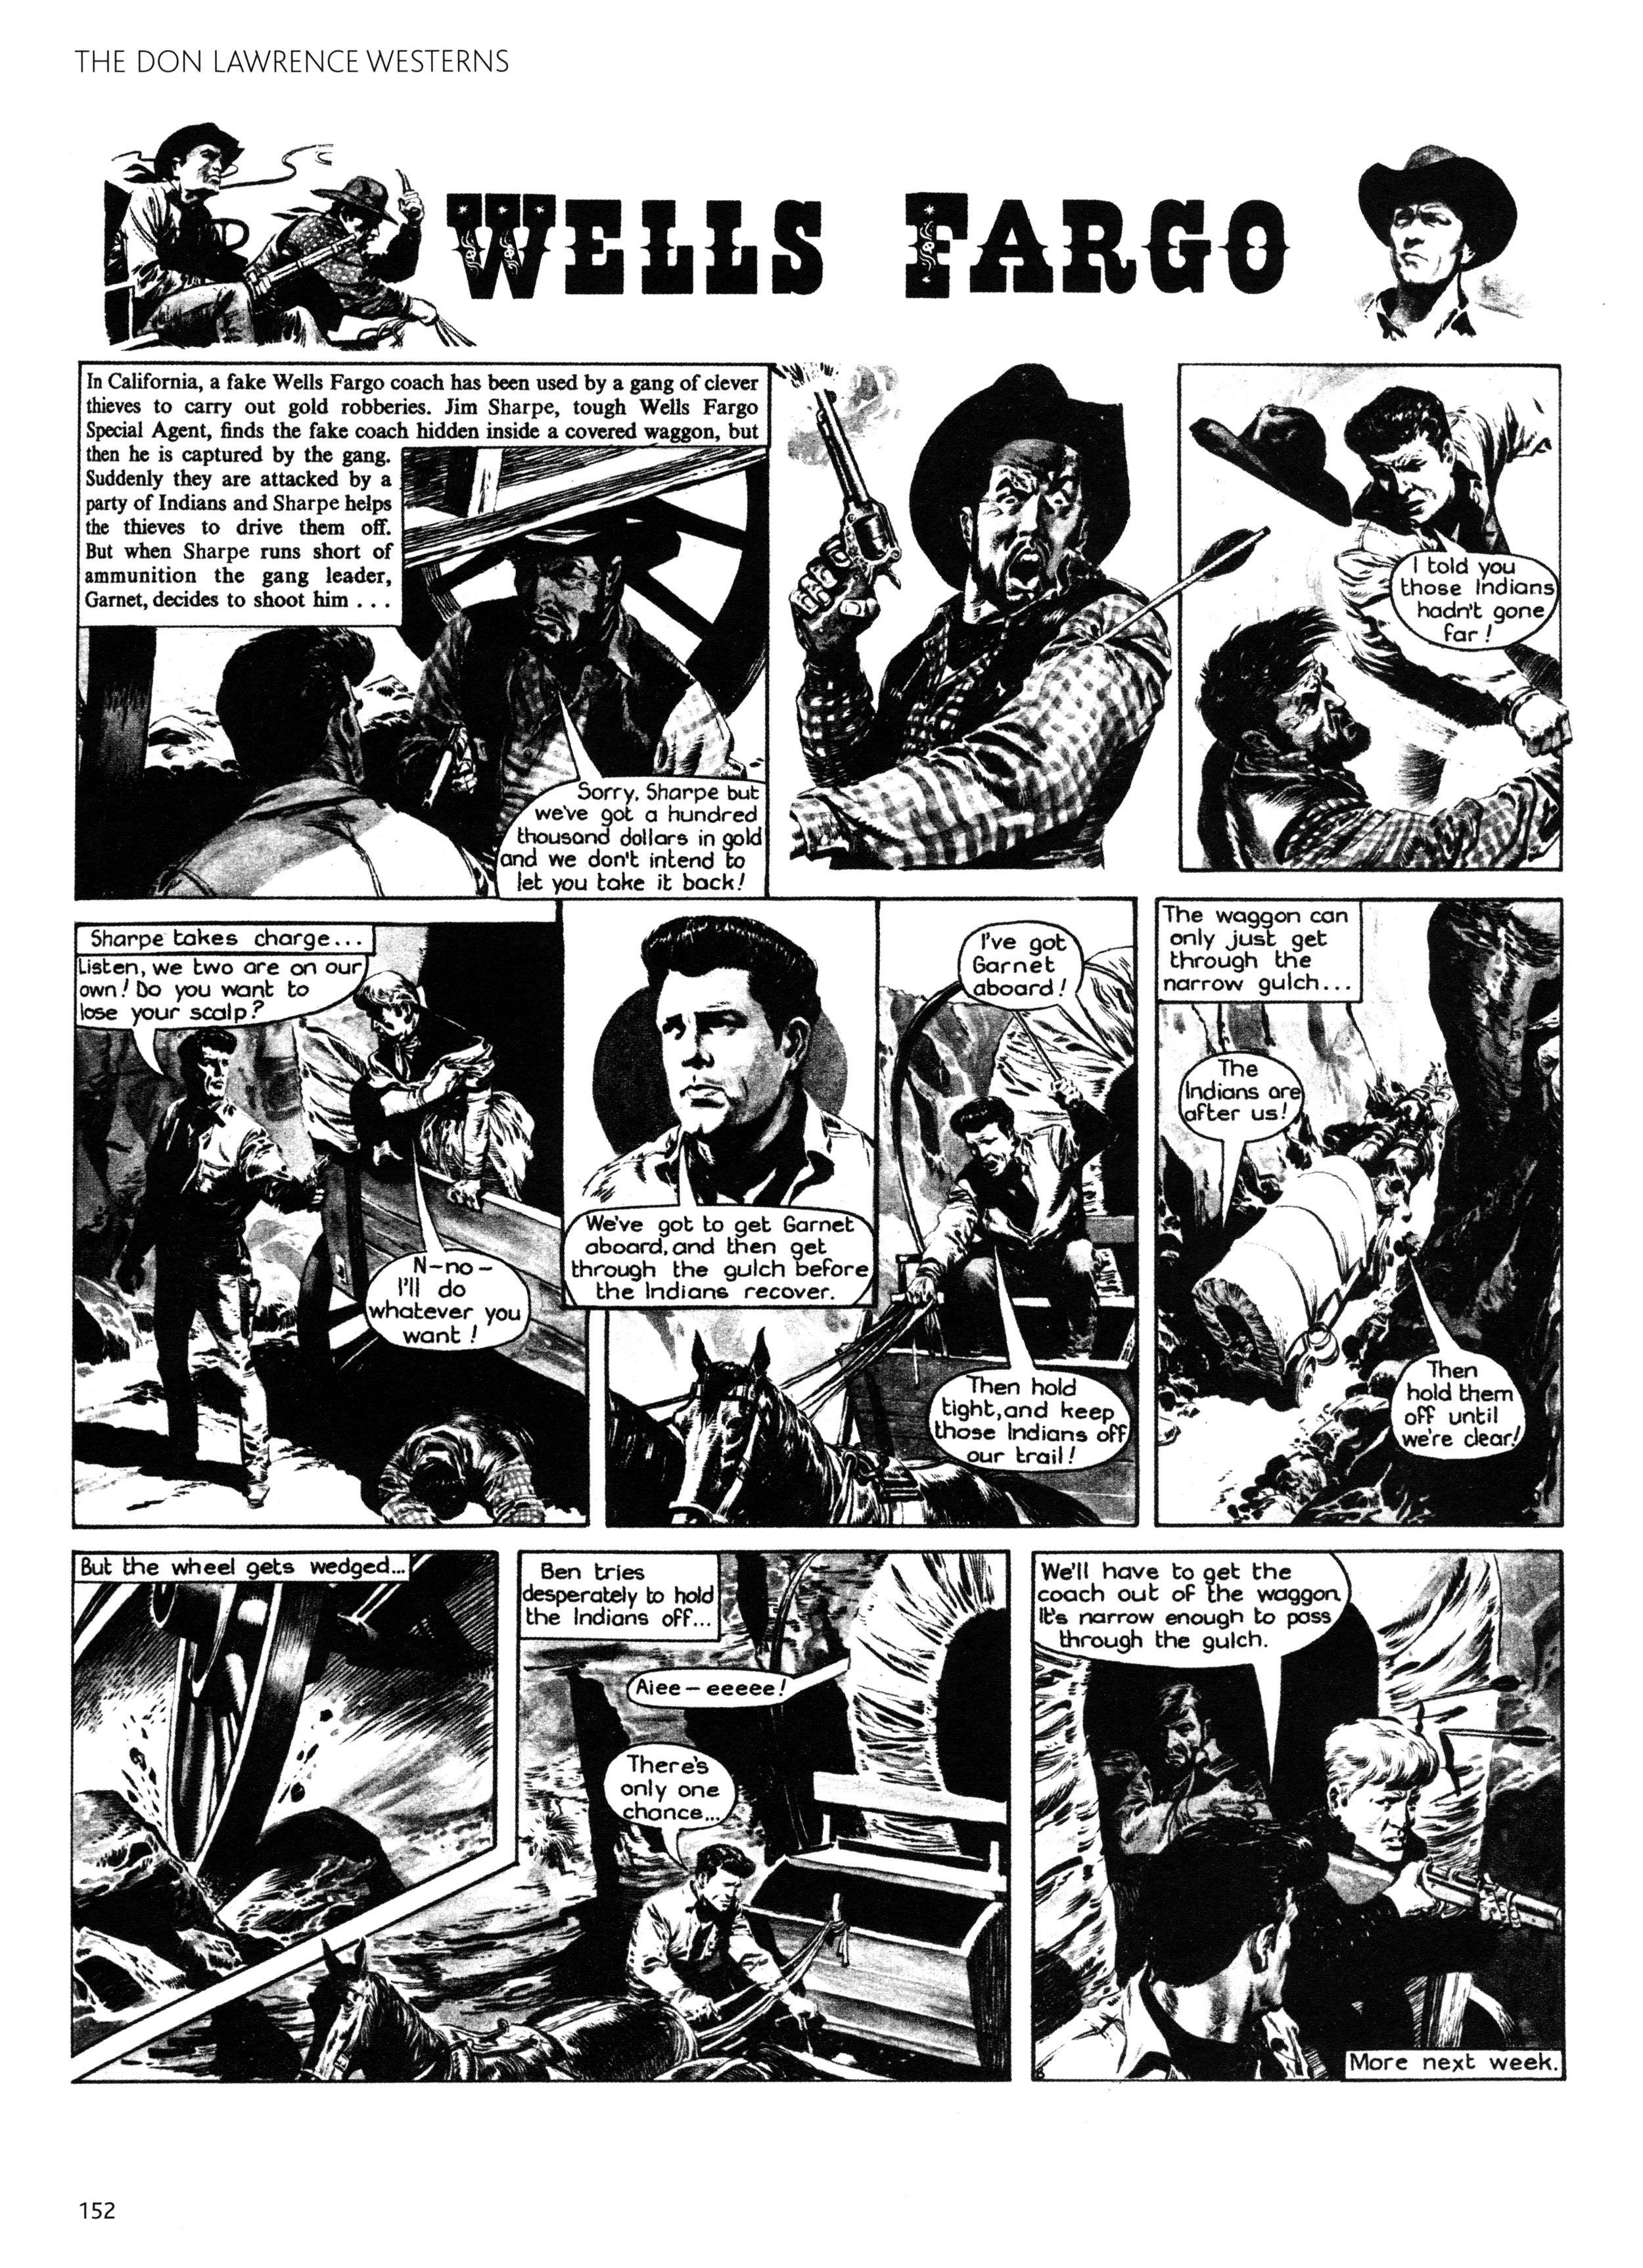 Read online Don Lawrence Westerns comic -  Issue # TPB (Part 2) - 53